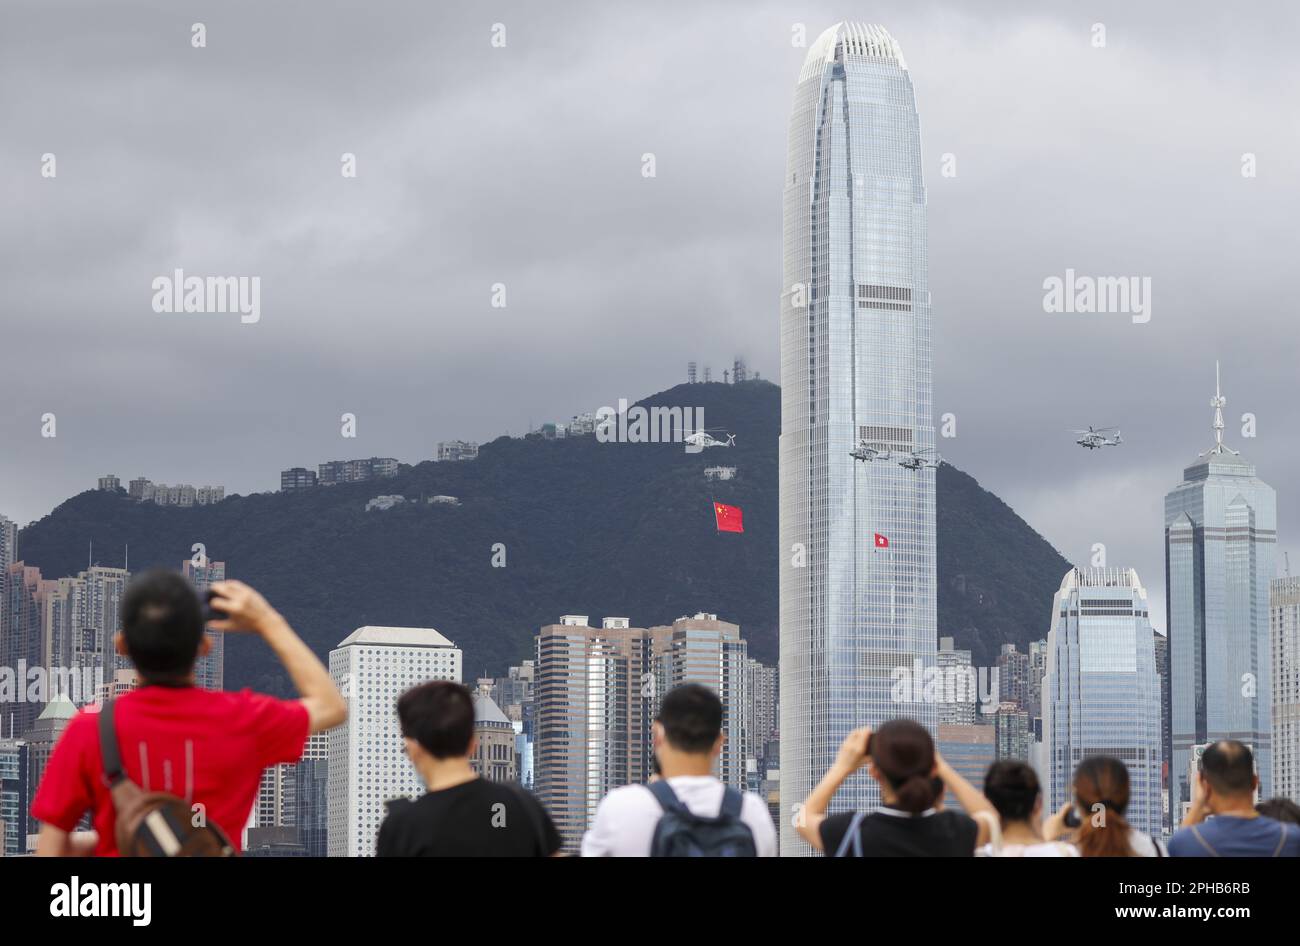 Members of the public watch the Government Flying Service's helicopters carrying the national and SAR flags fly past and sea parade during the flag-raising ceremony at Golden Bauhinia Square in Wan Chai to celebrate the 25th anniversary of the establishment of the HKSAR, viewing from the Tsim Sha Tsui promenade, while police patrol and stand guard. 01JUL22 SCMP / Nora Tam Stock Photo